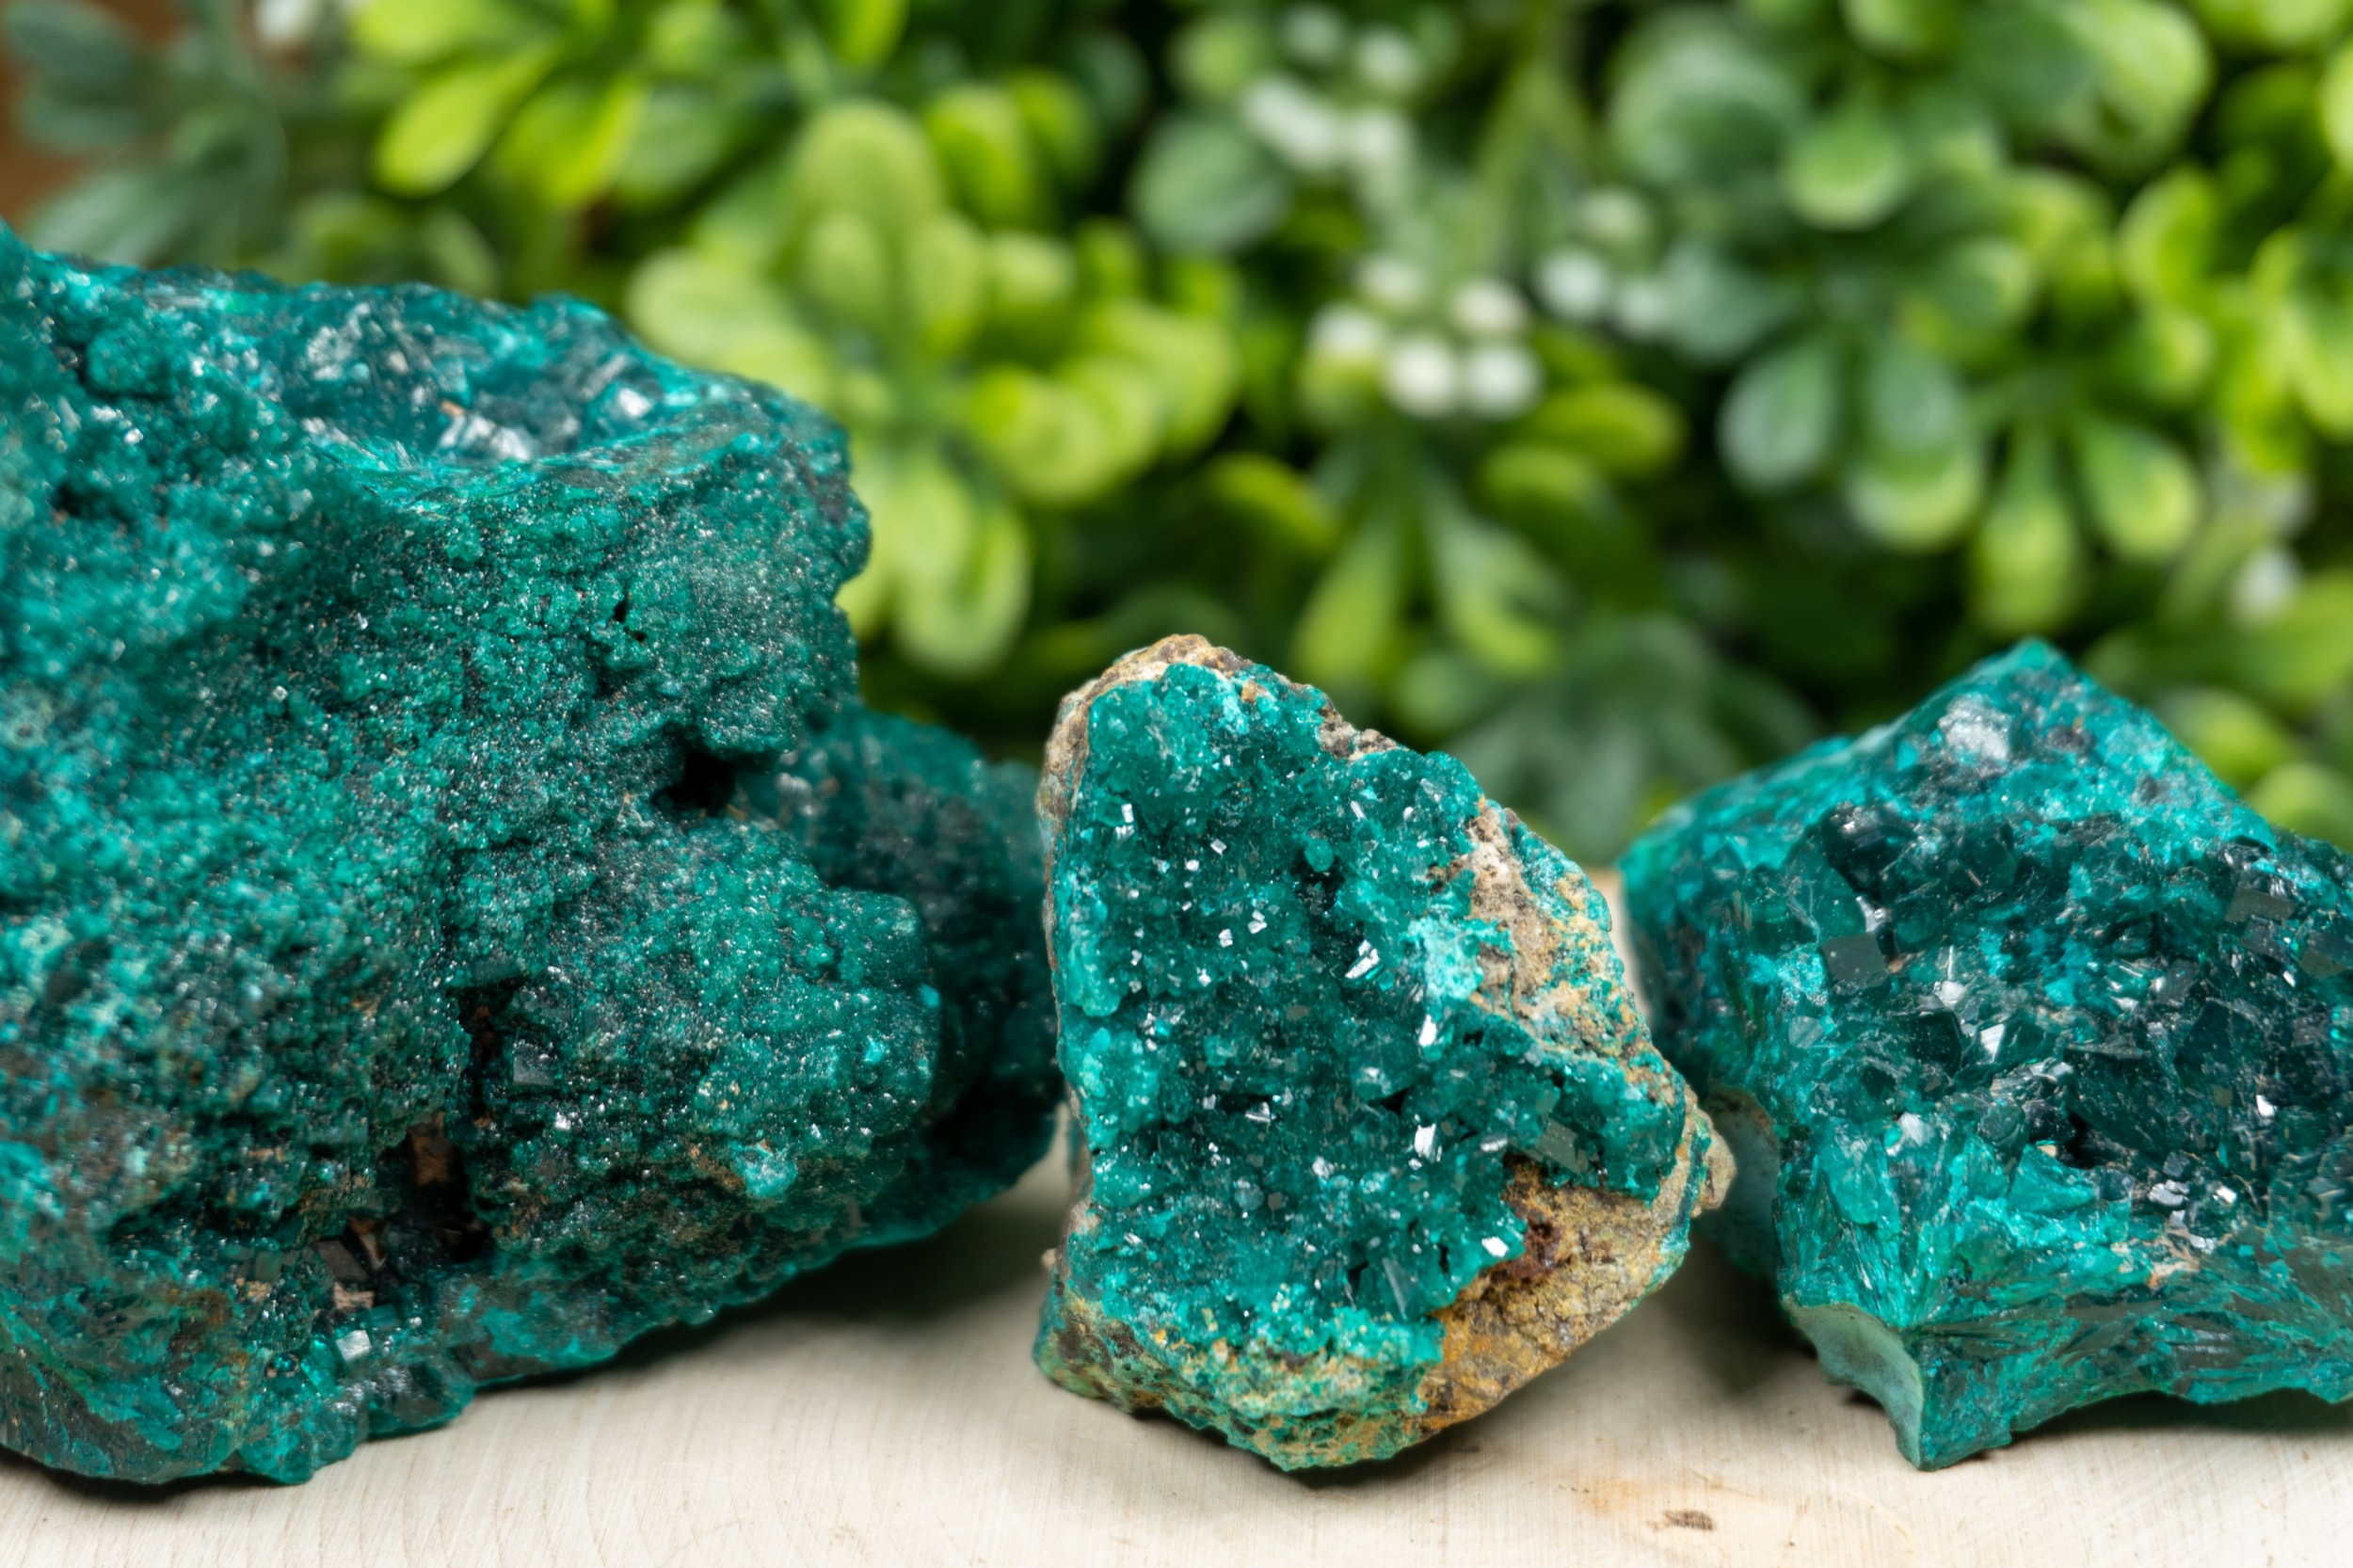 Dioptase Crystal - A Bluish-Green Copper Cyclosilicate Mineral